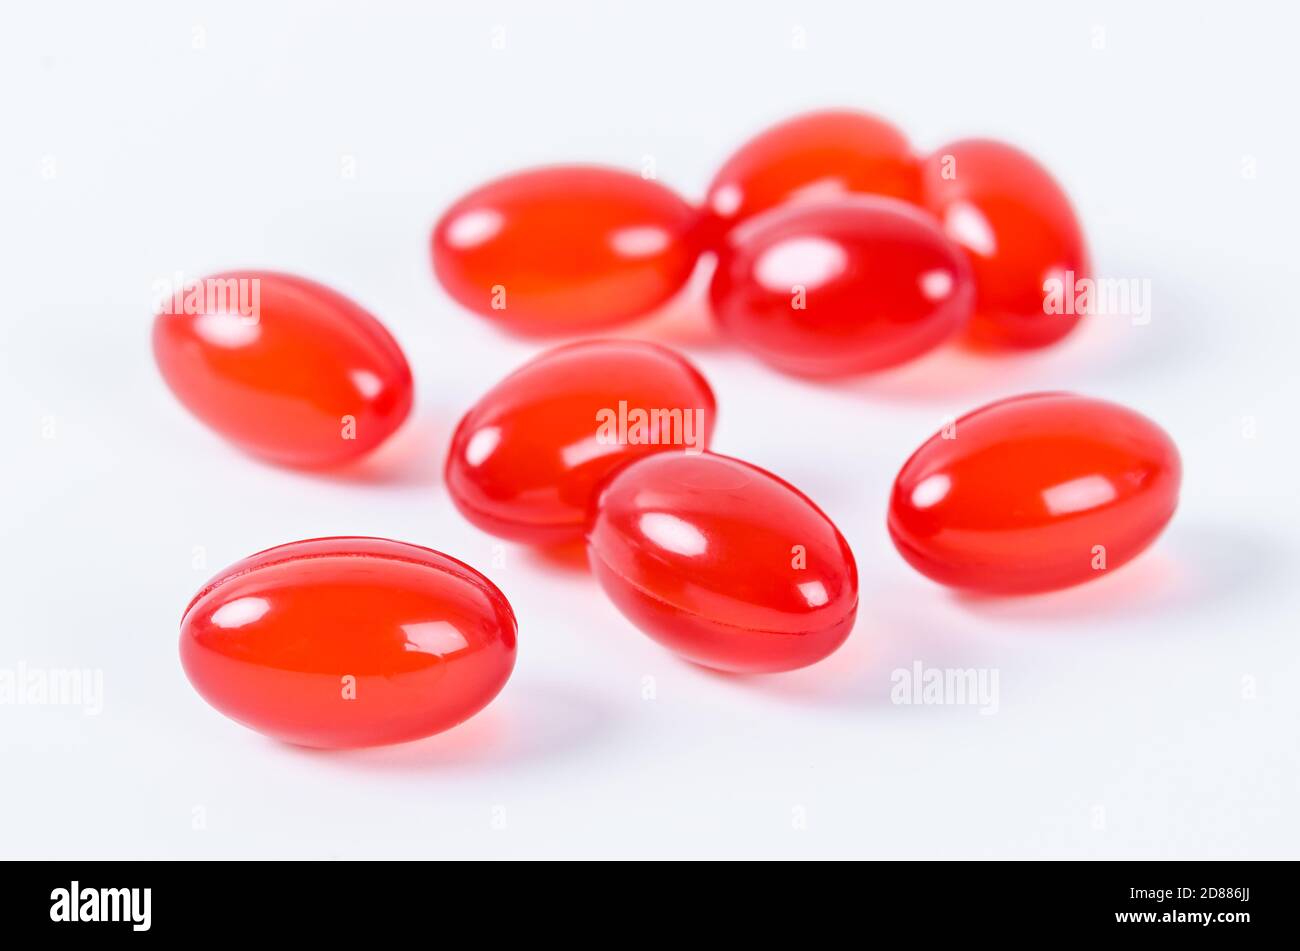 Vitamin Coenzyme Q10 isolated on a white background. To prevent aging. Pills and medicine Stock Photo